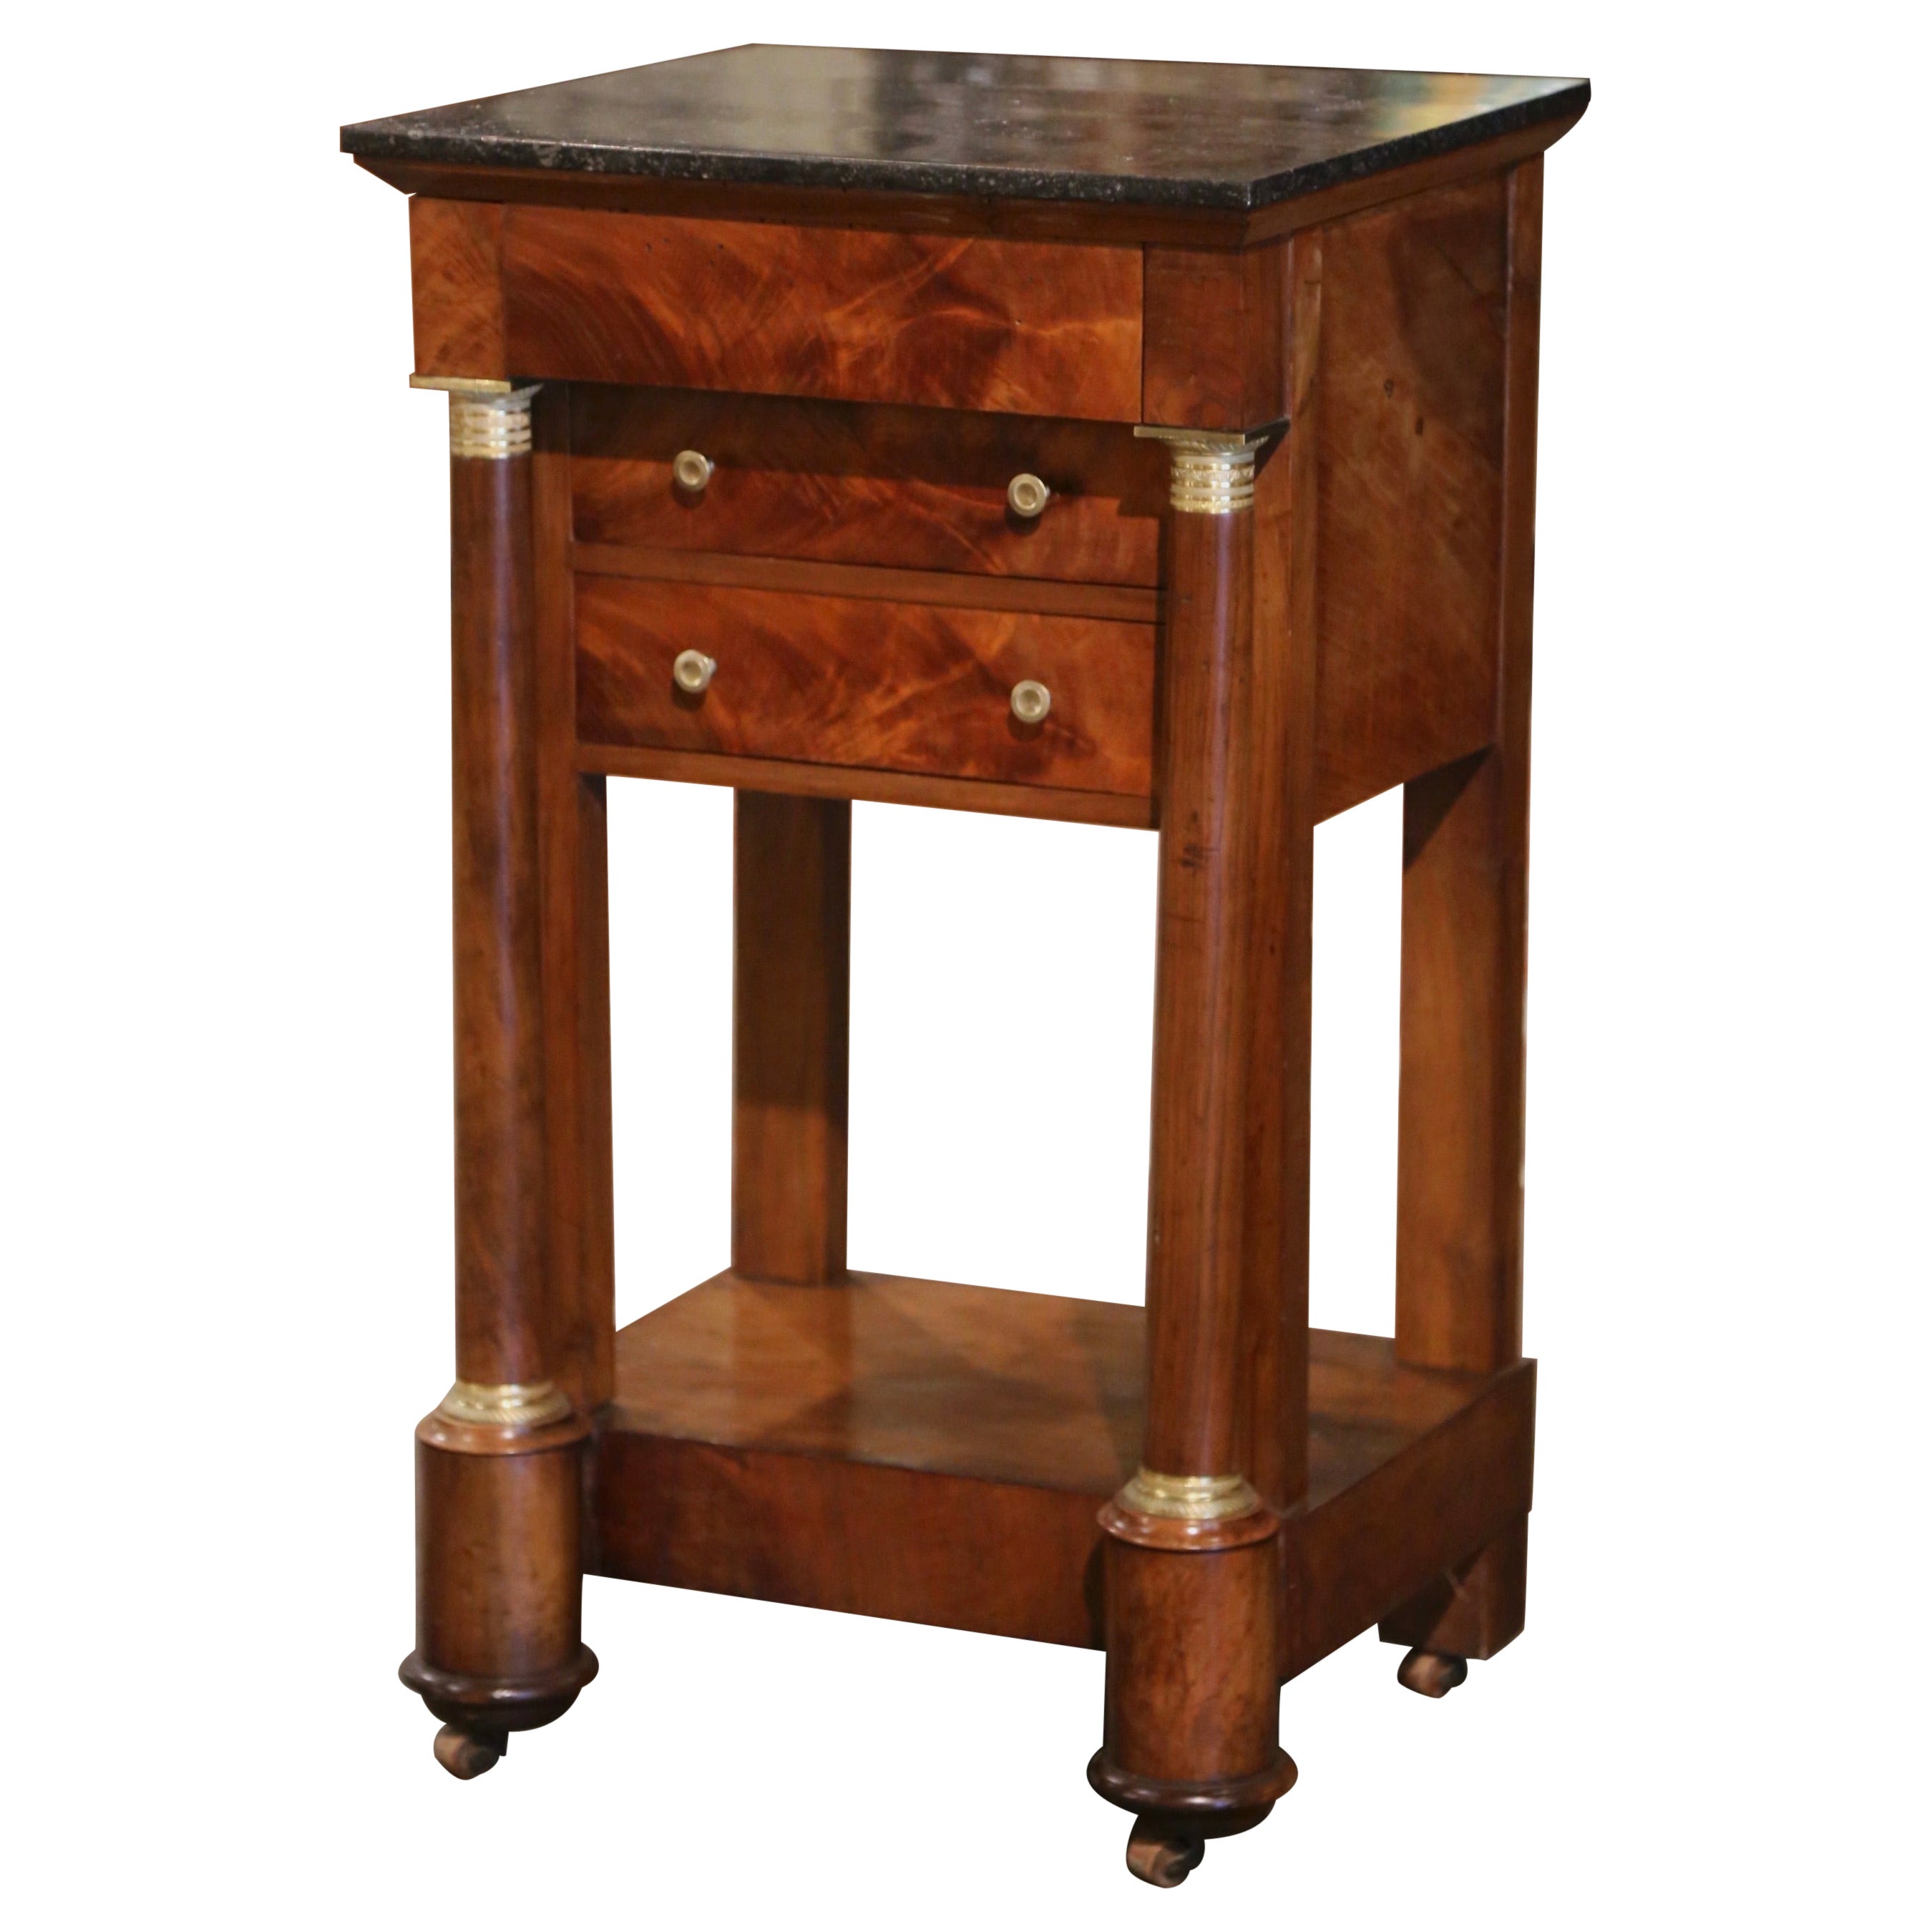 19th Century French Empire Marble Top Mahogany Bedside Table with Drawers